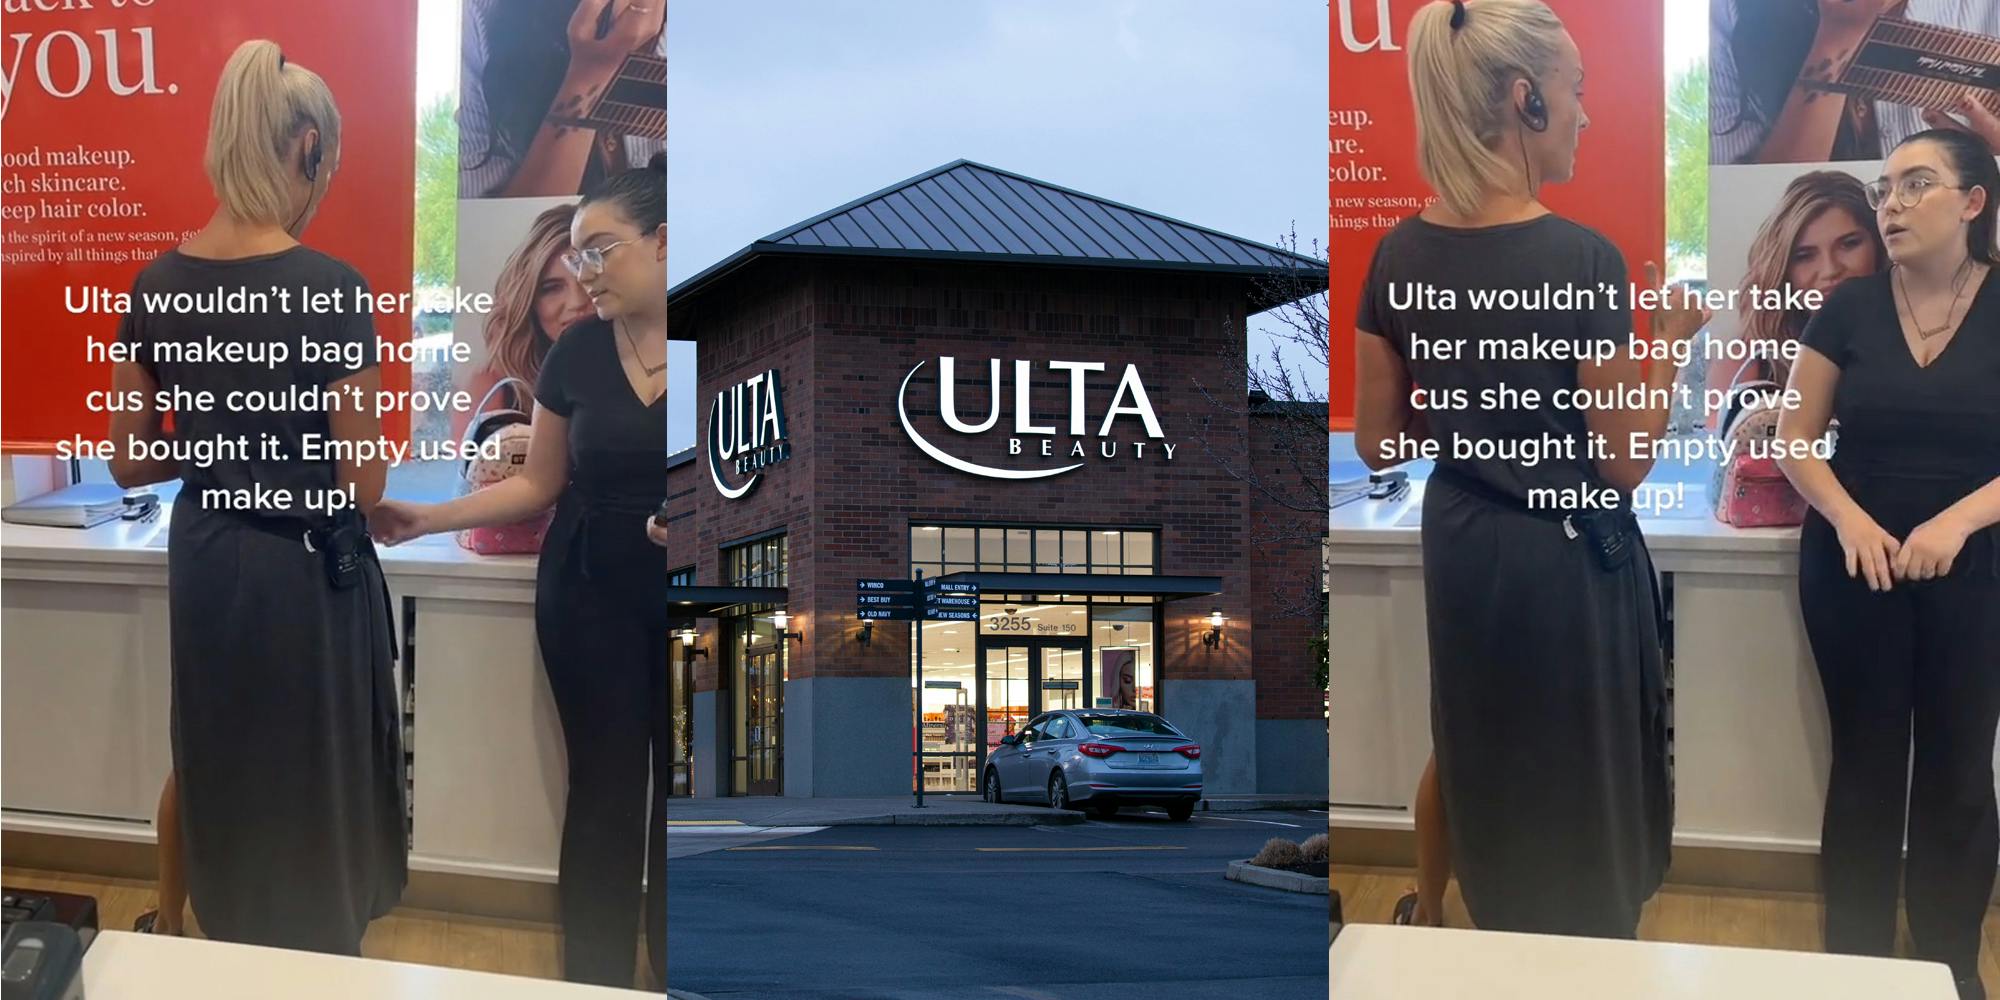 Ulta manager and worker behind counter speaking caption "Ulta wouldn't let her take her makeup bag home cus she couldn't prove she bought it. Empty used makeup!" (l) Ulta building and sign (c) Ulta manager and worker behind counter speaking caption "Ulta wouldn't let her take her makeup bag home cus she couldn't prove she bought it. Empty used makeup!" (r)